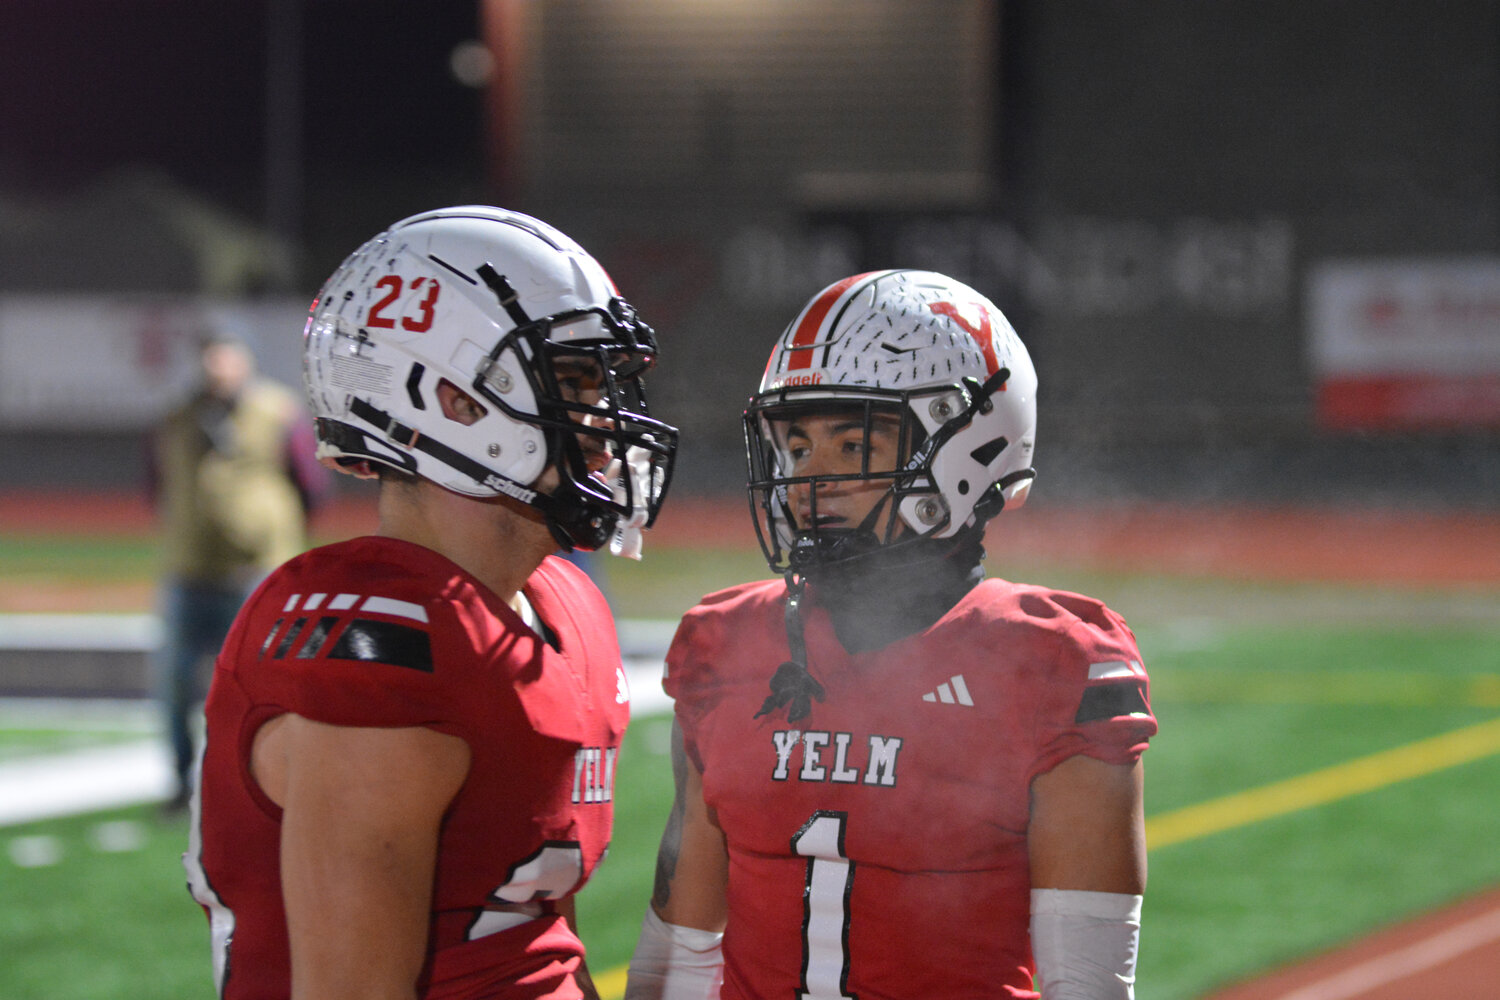 Senior team captains Brayden Platt (left) and AJ Henderson (right) reflect on Yelm’s 29-12 victory over Mount Tahoma in the 3A state quarterfinals on Nov. 17.